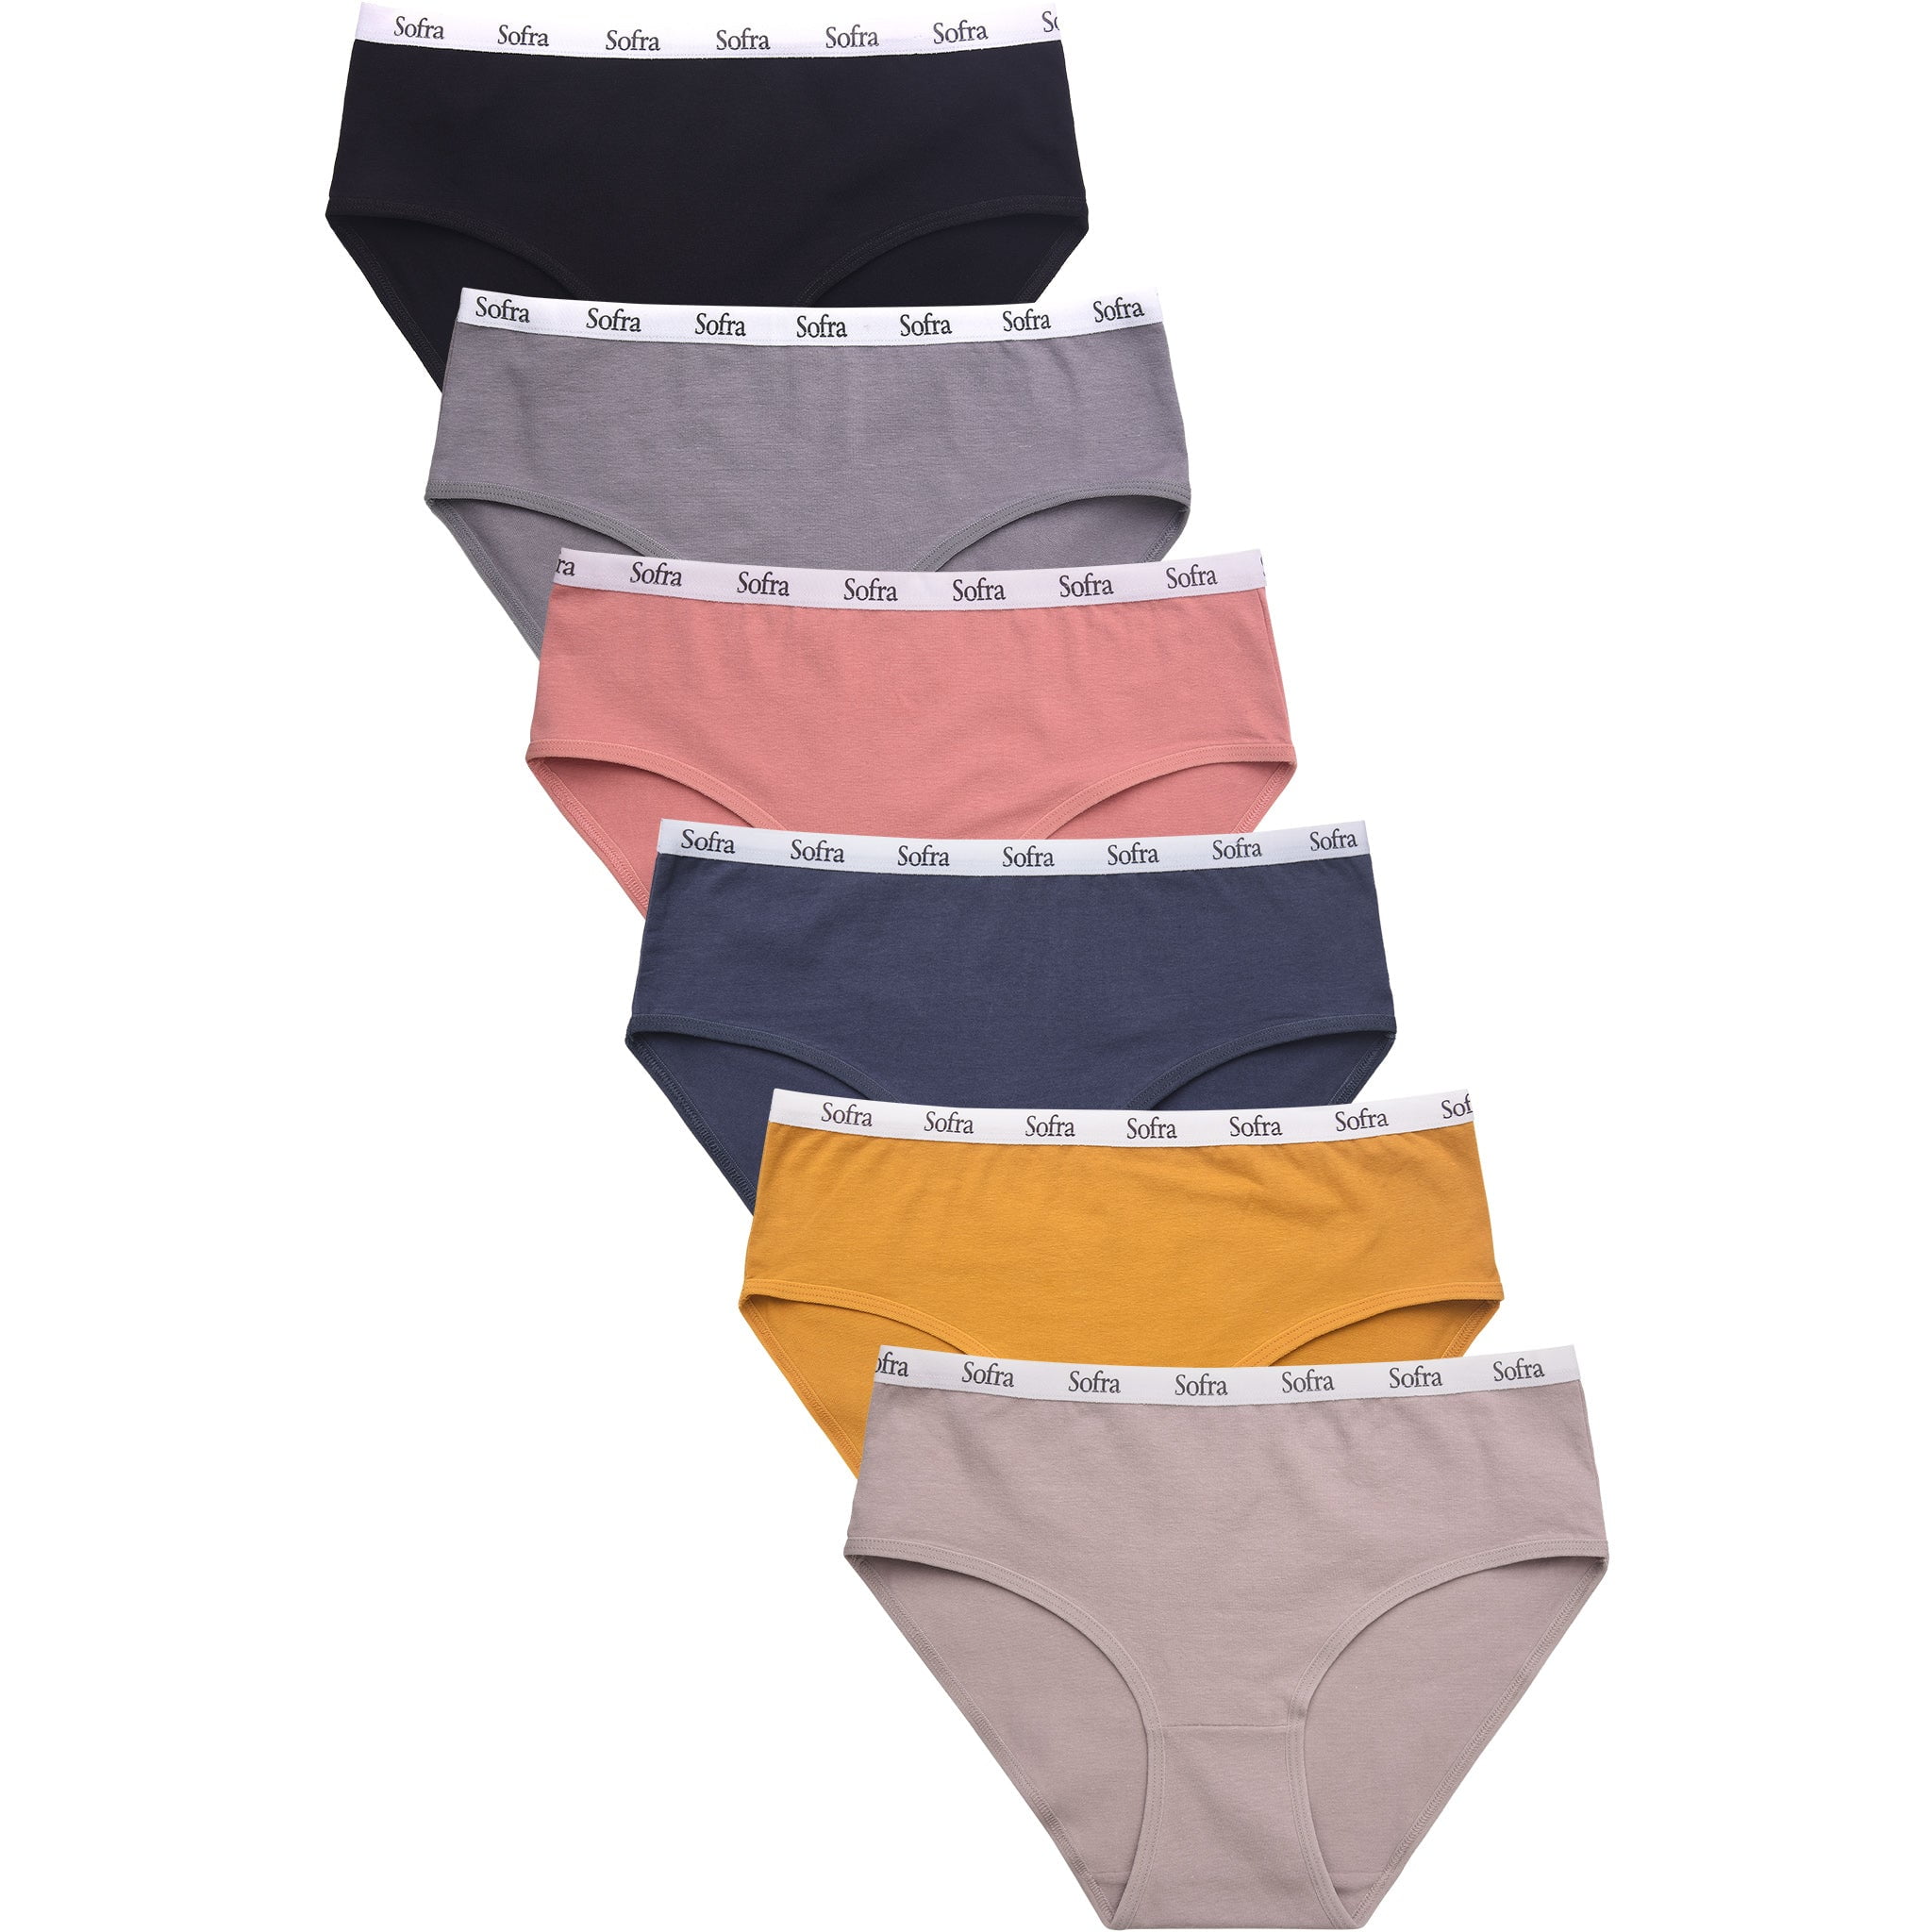 247 Frenzy Women's Essentials PACK OF 6 Cotton Stretch Bikini Panty  Underwear with Extended Side Seams LP1379CKE Size SM at  Women's  Clothing store